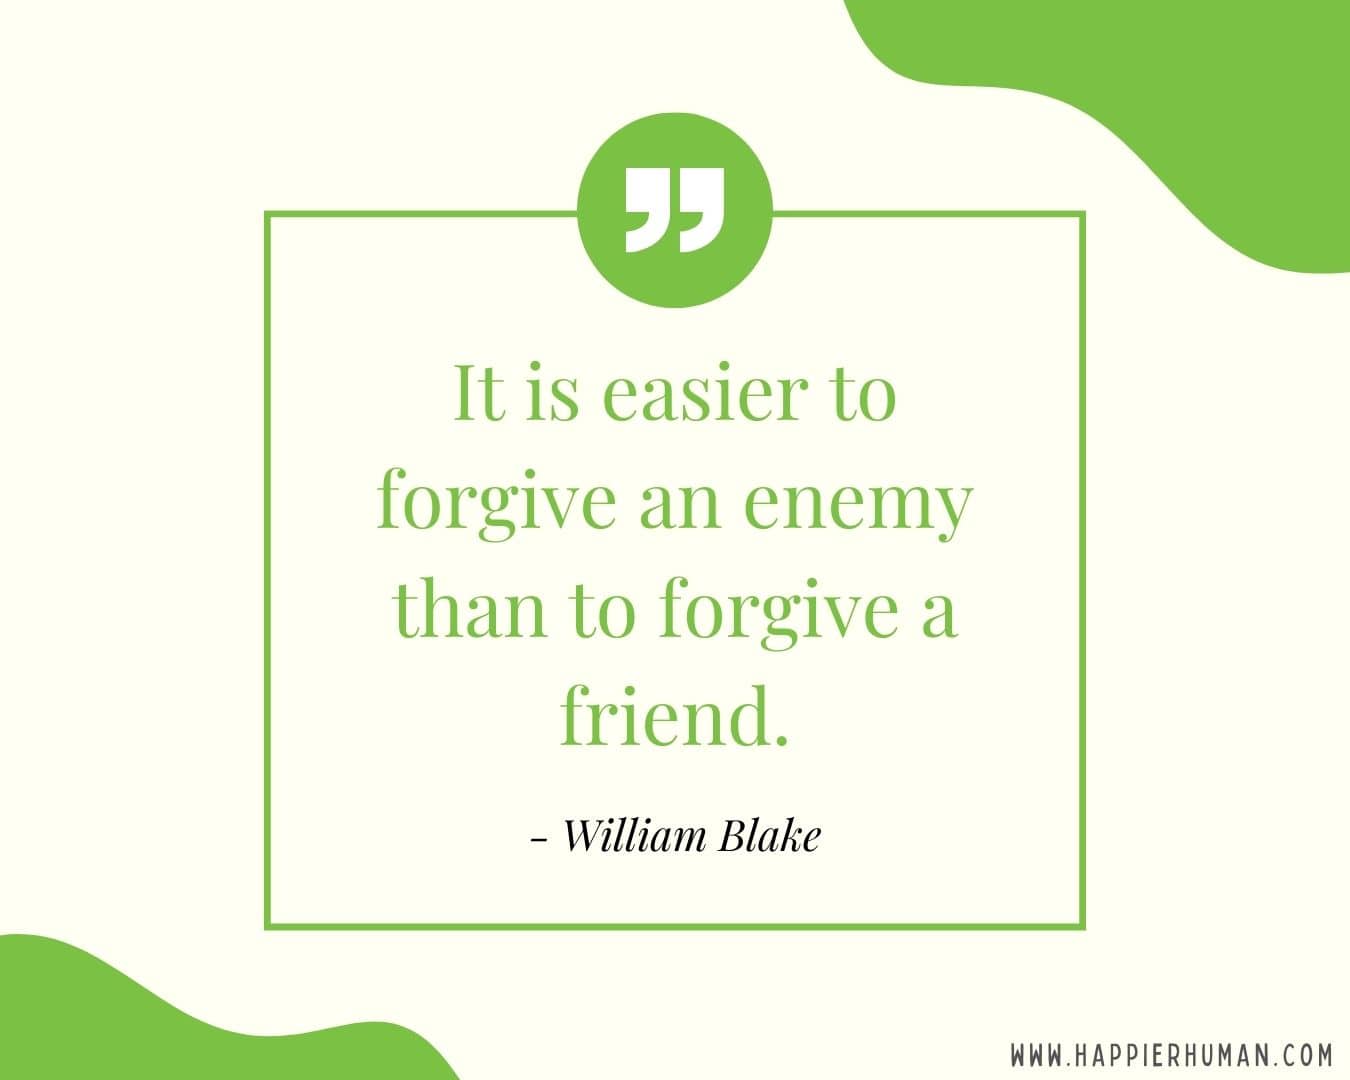 Broken Trust Quotes - “It is easier to forgive an enemy than to forgive a friend.” - William Blake